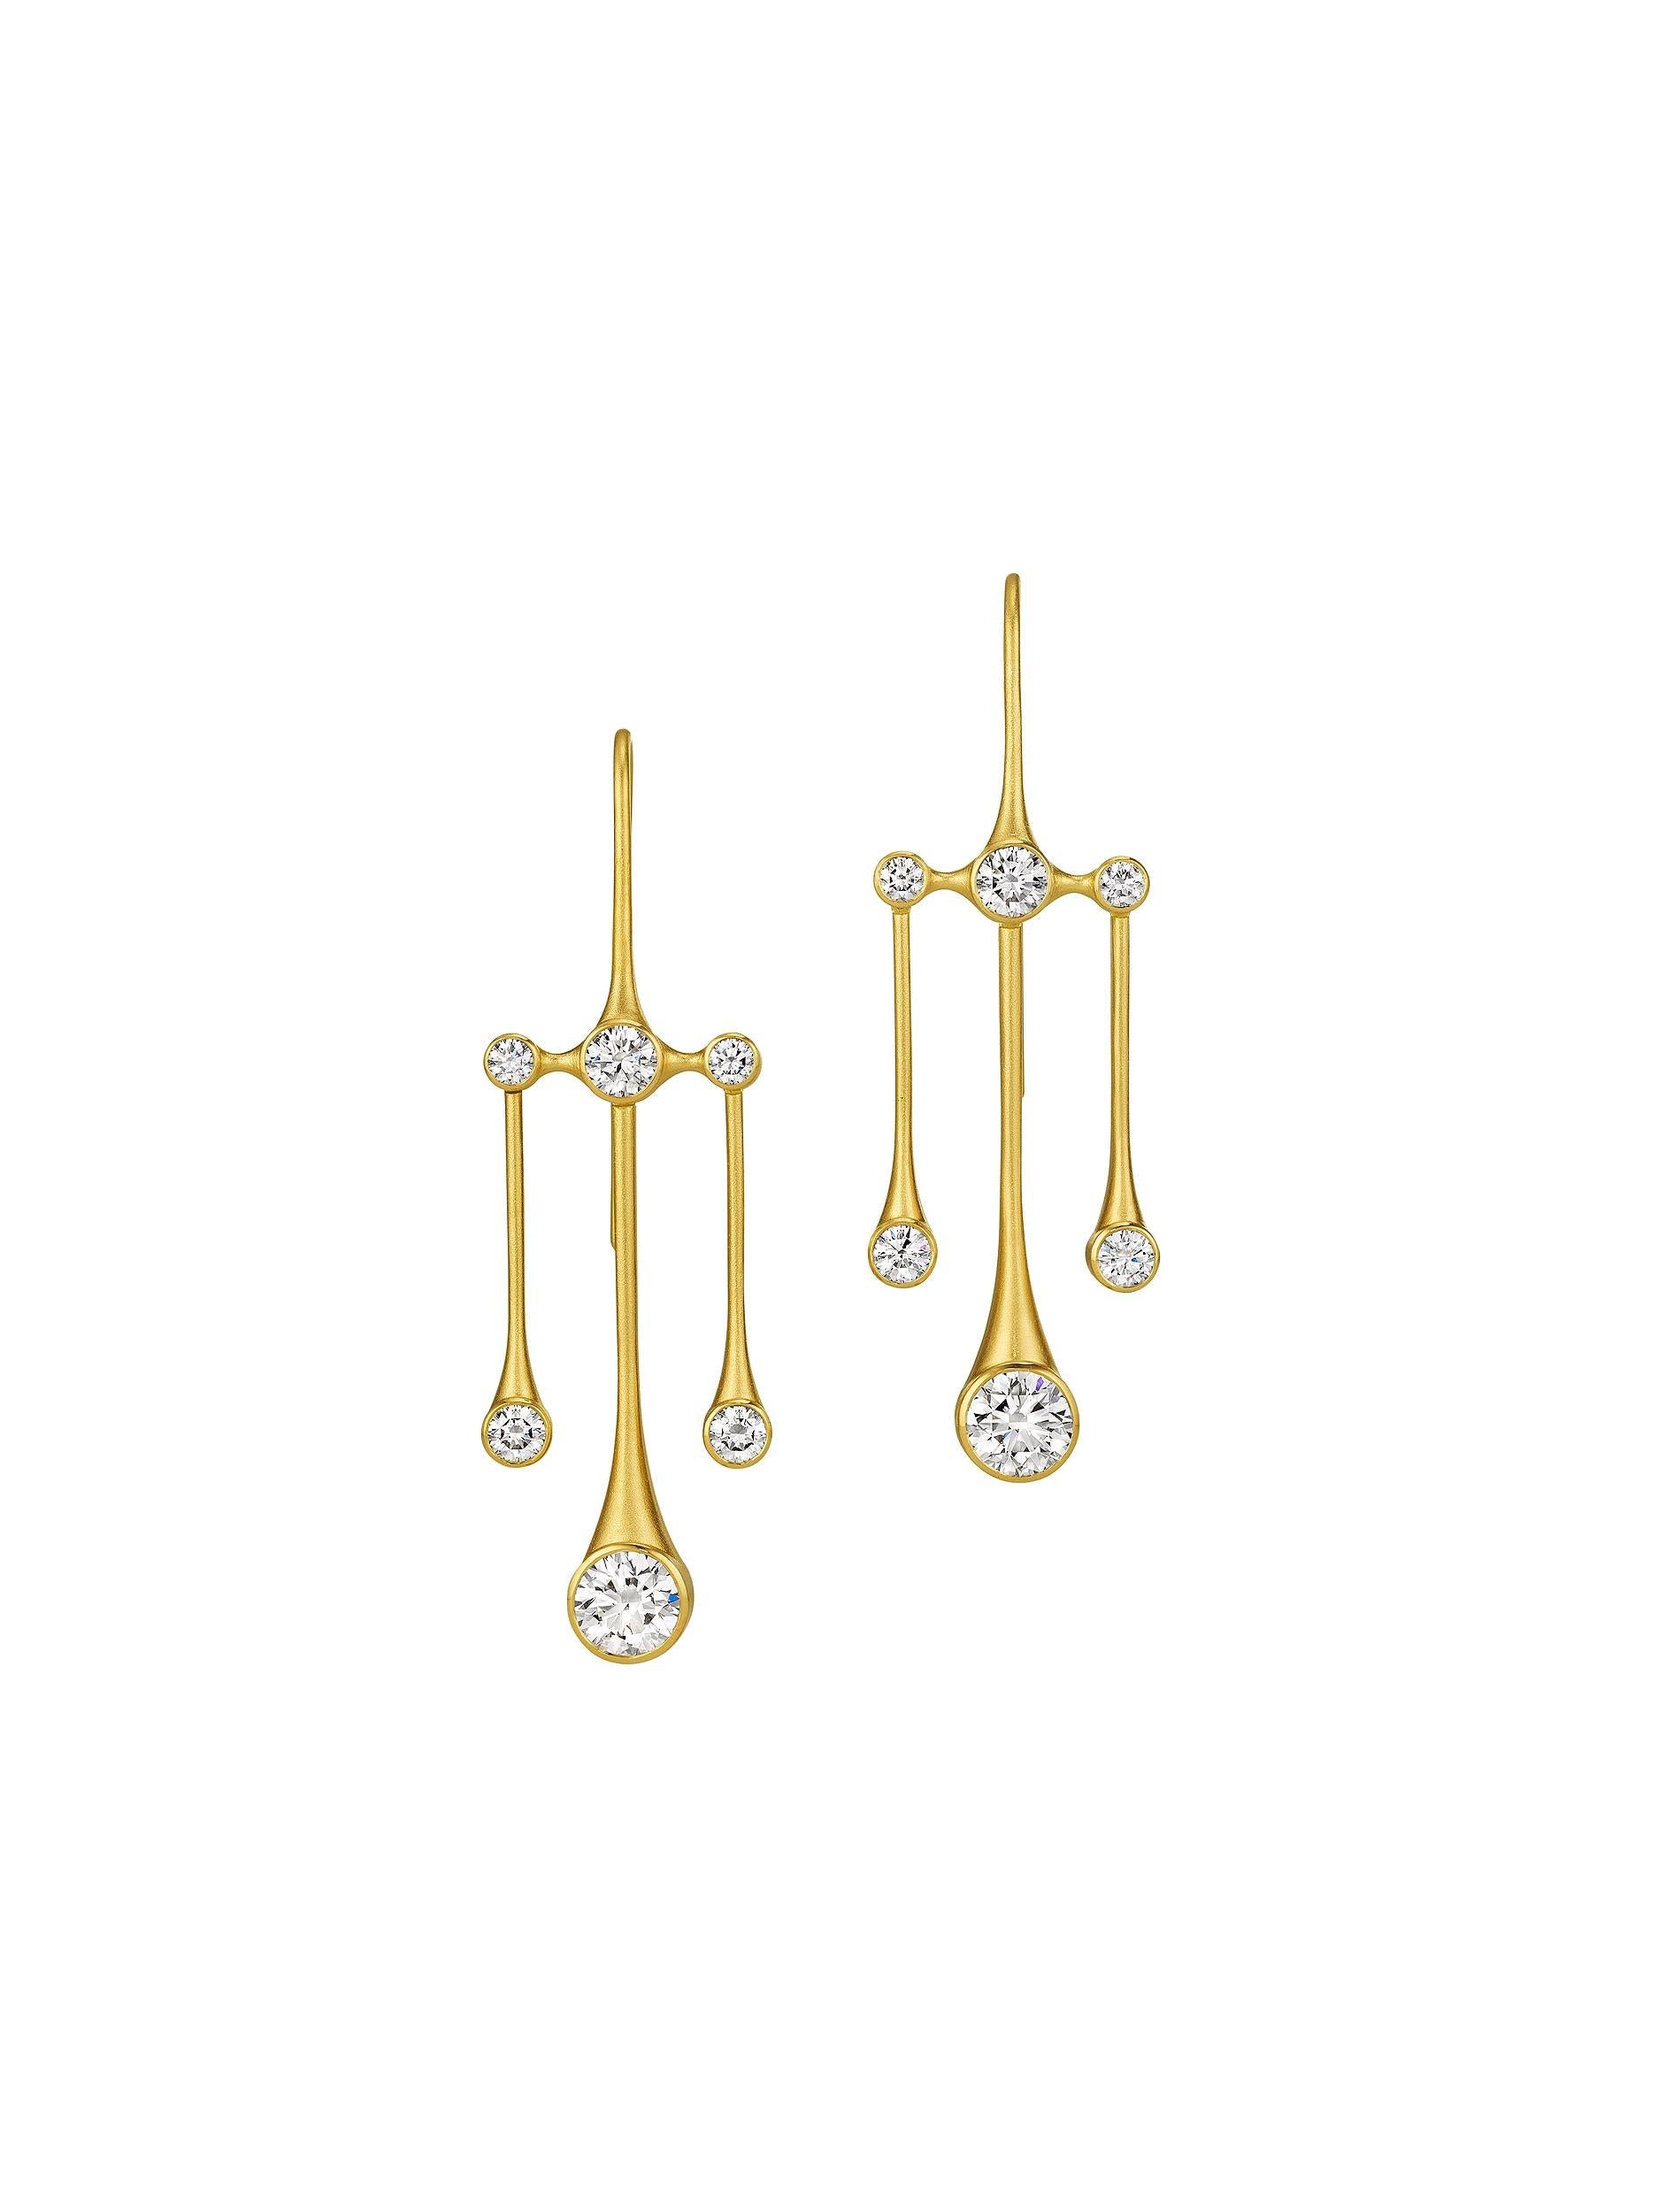 Contemporary Geoffrey Good Galaxy Natural Diamond Chandelier Earrings For Sale